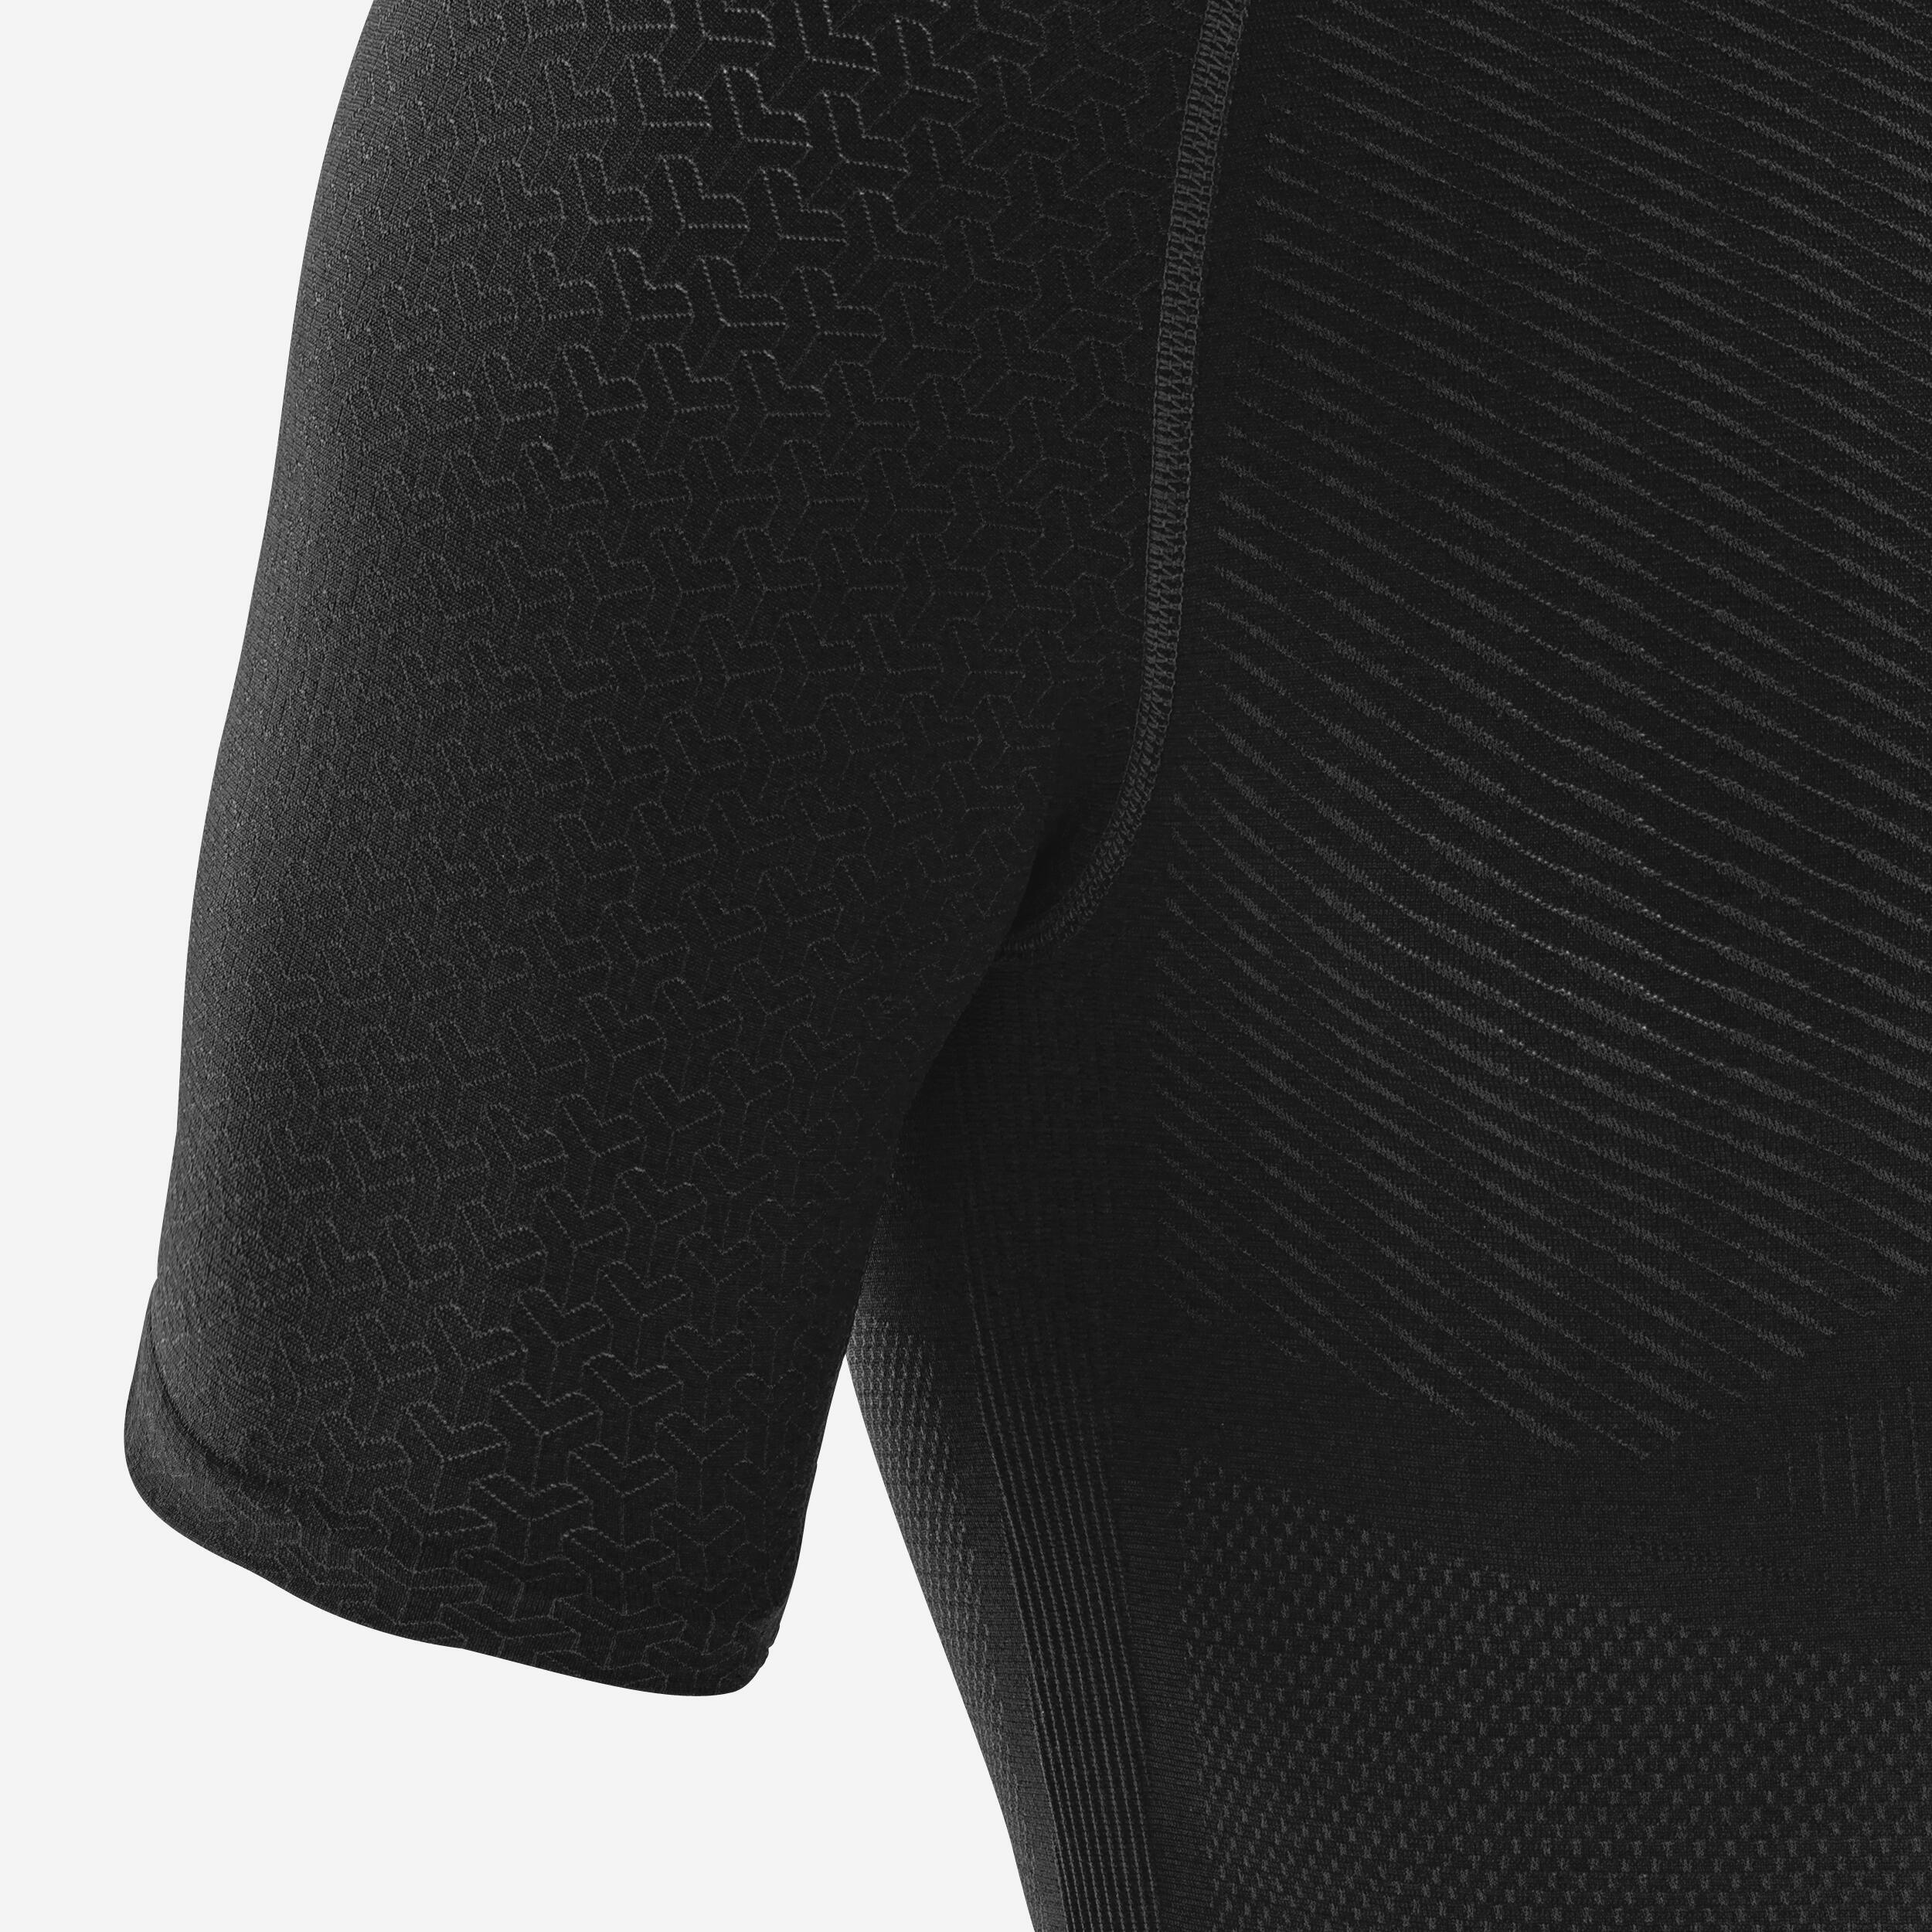 Adult Short-Sleeved Thermal Base Layer Top Keepdry 500 - Black 5/5